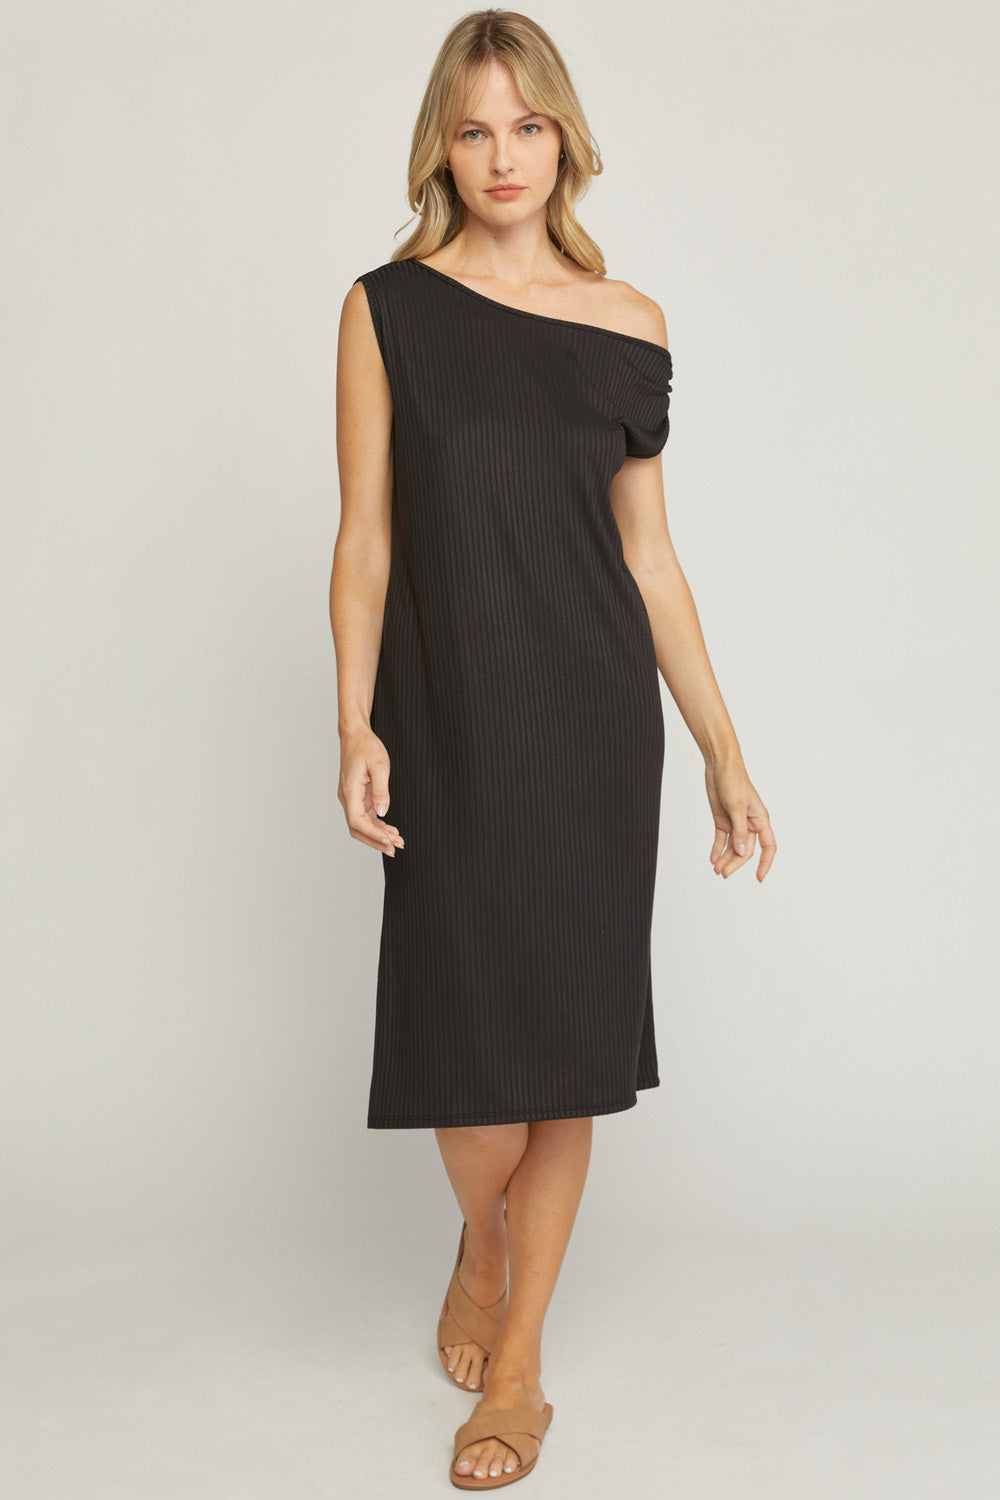 Off the shoulder lightweight Ribbed black dress - the Colleen